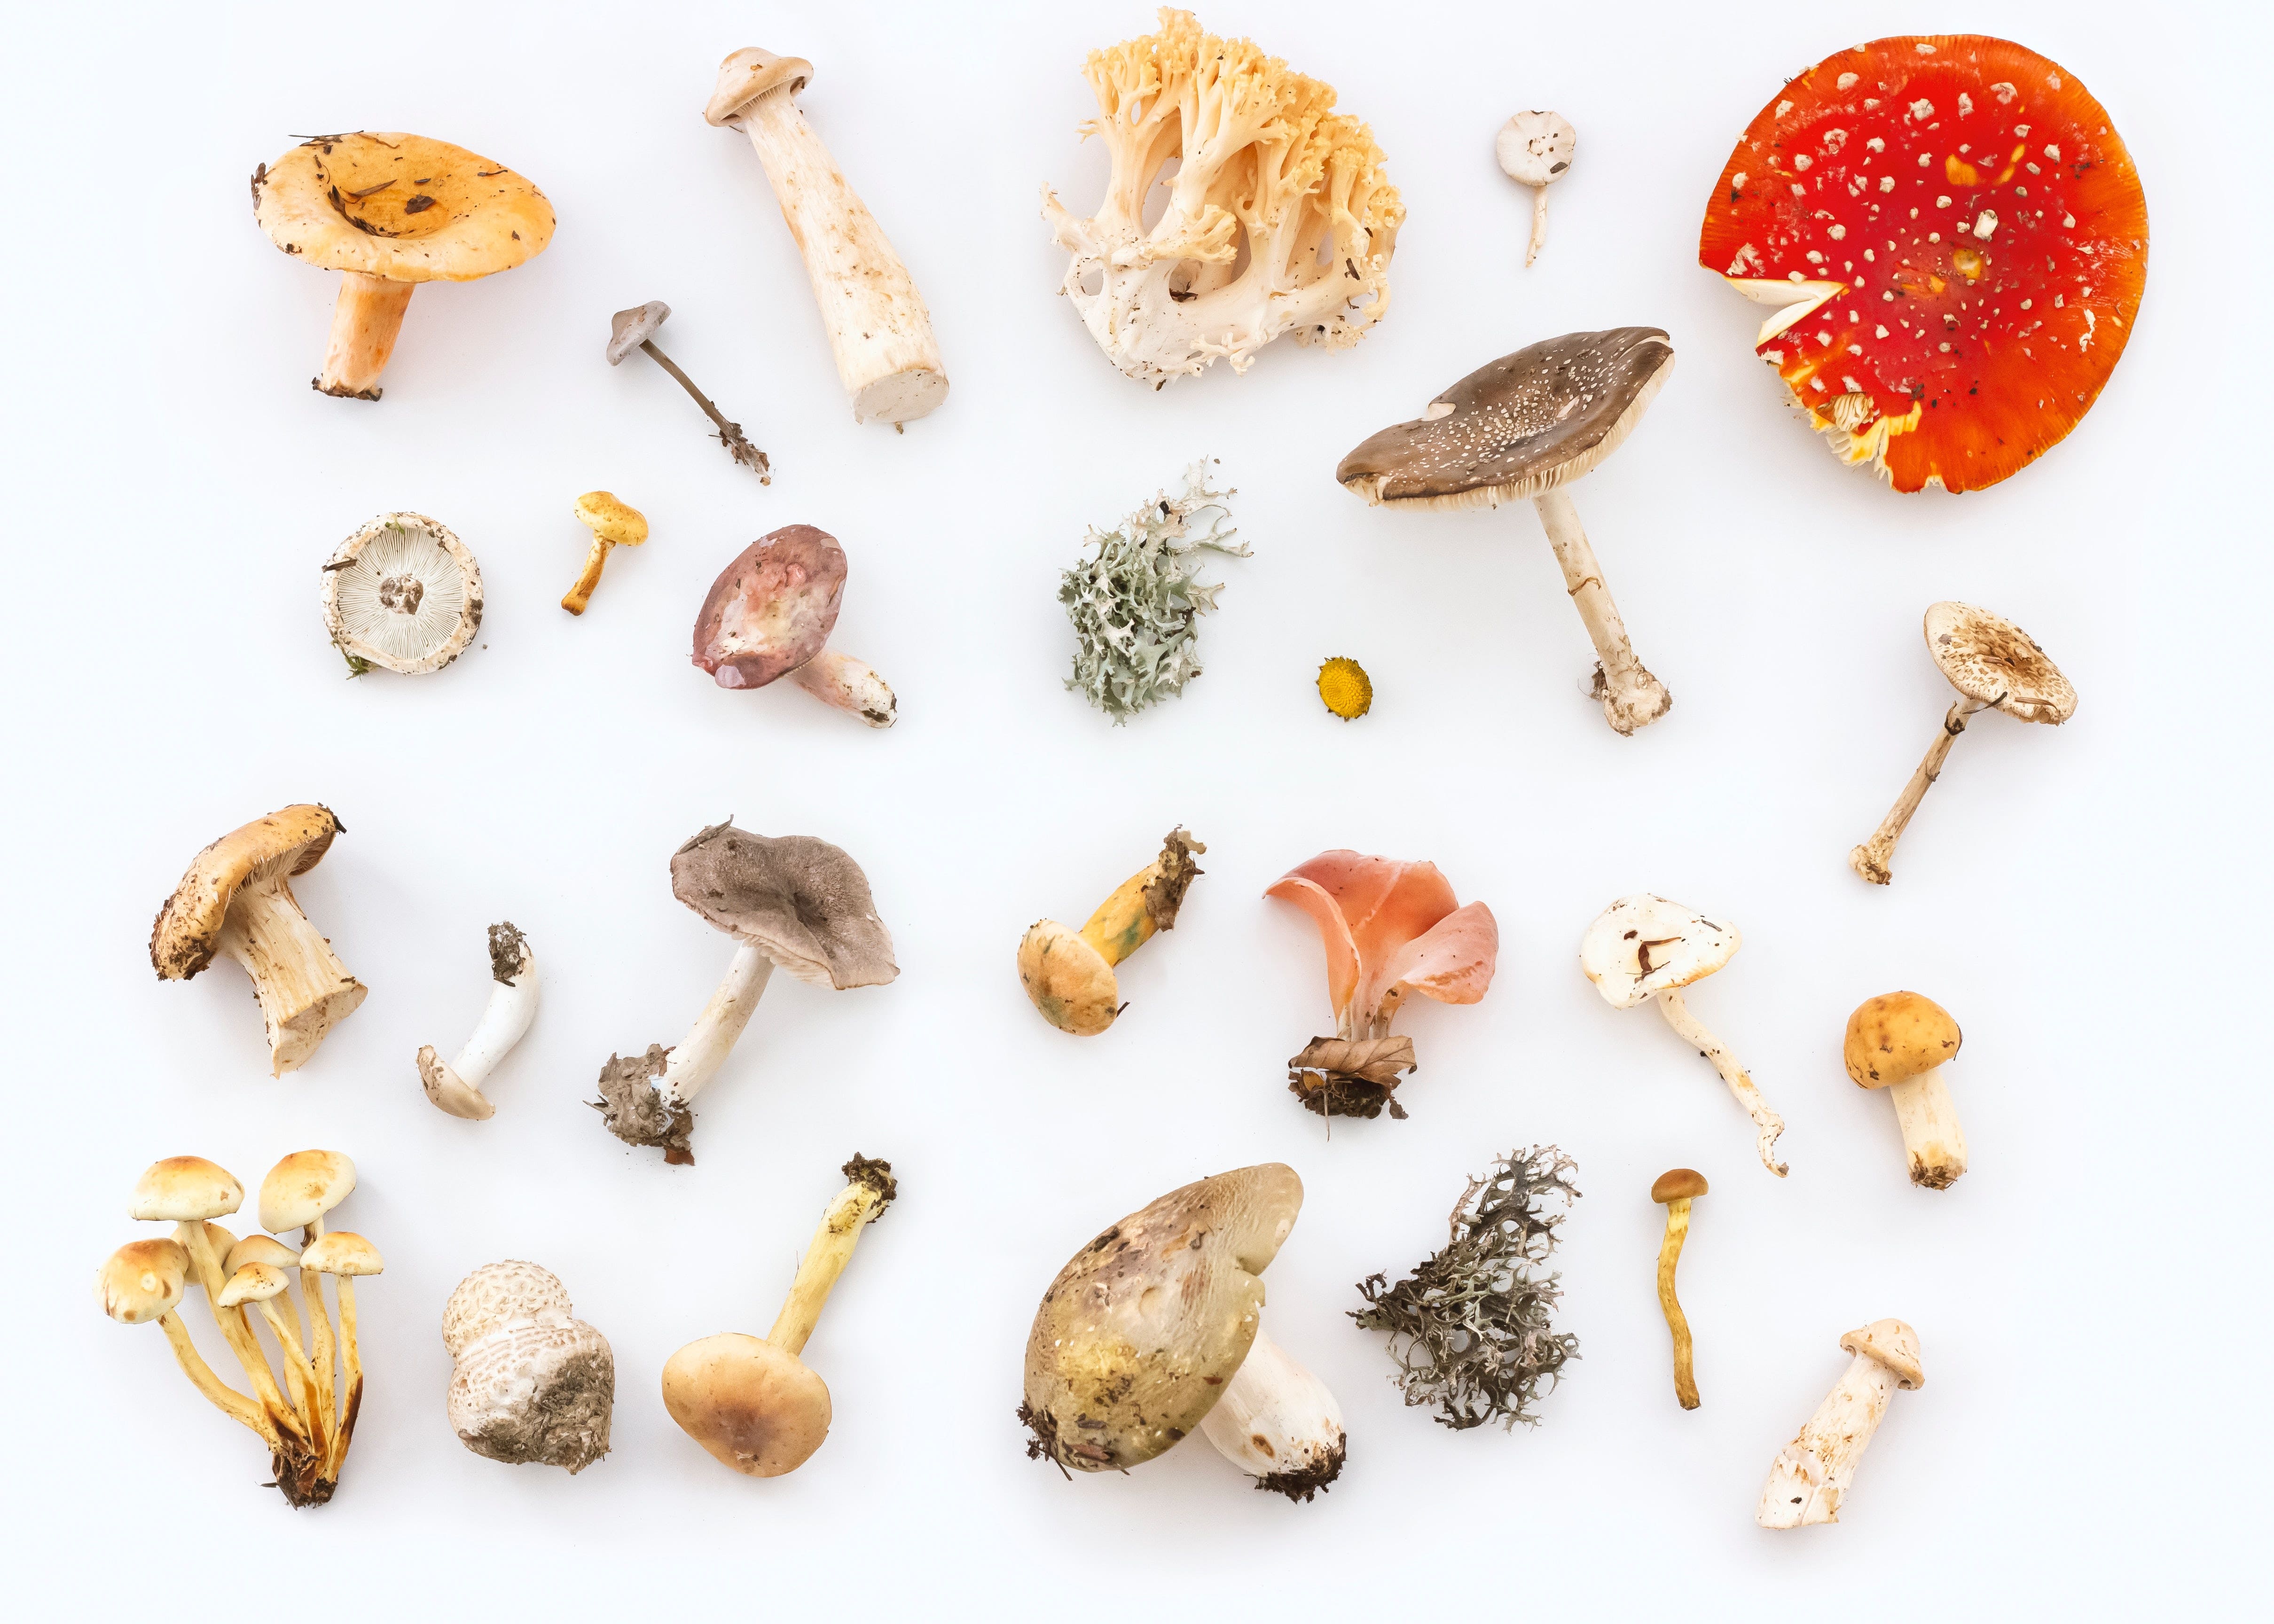 Psychedelics Company Core One Labs Dives Into Functional Mushrooms With New $3M Acquisition